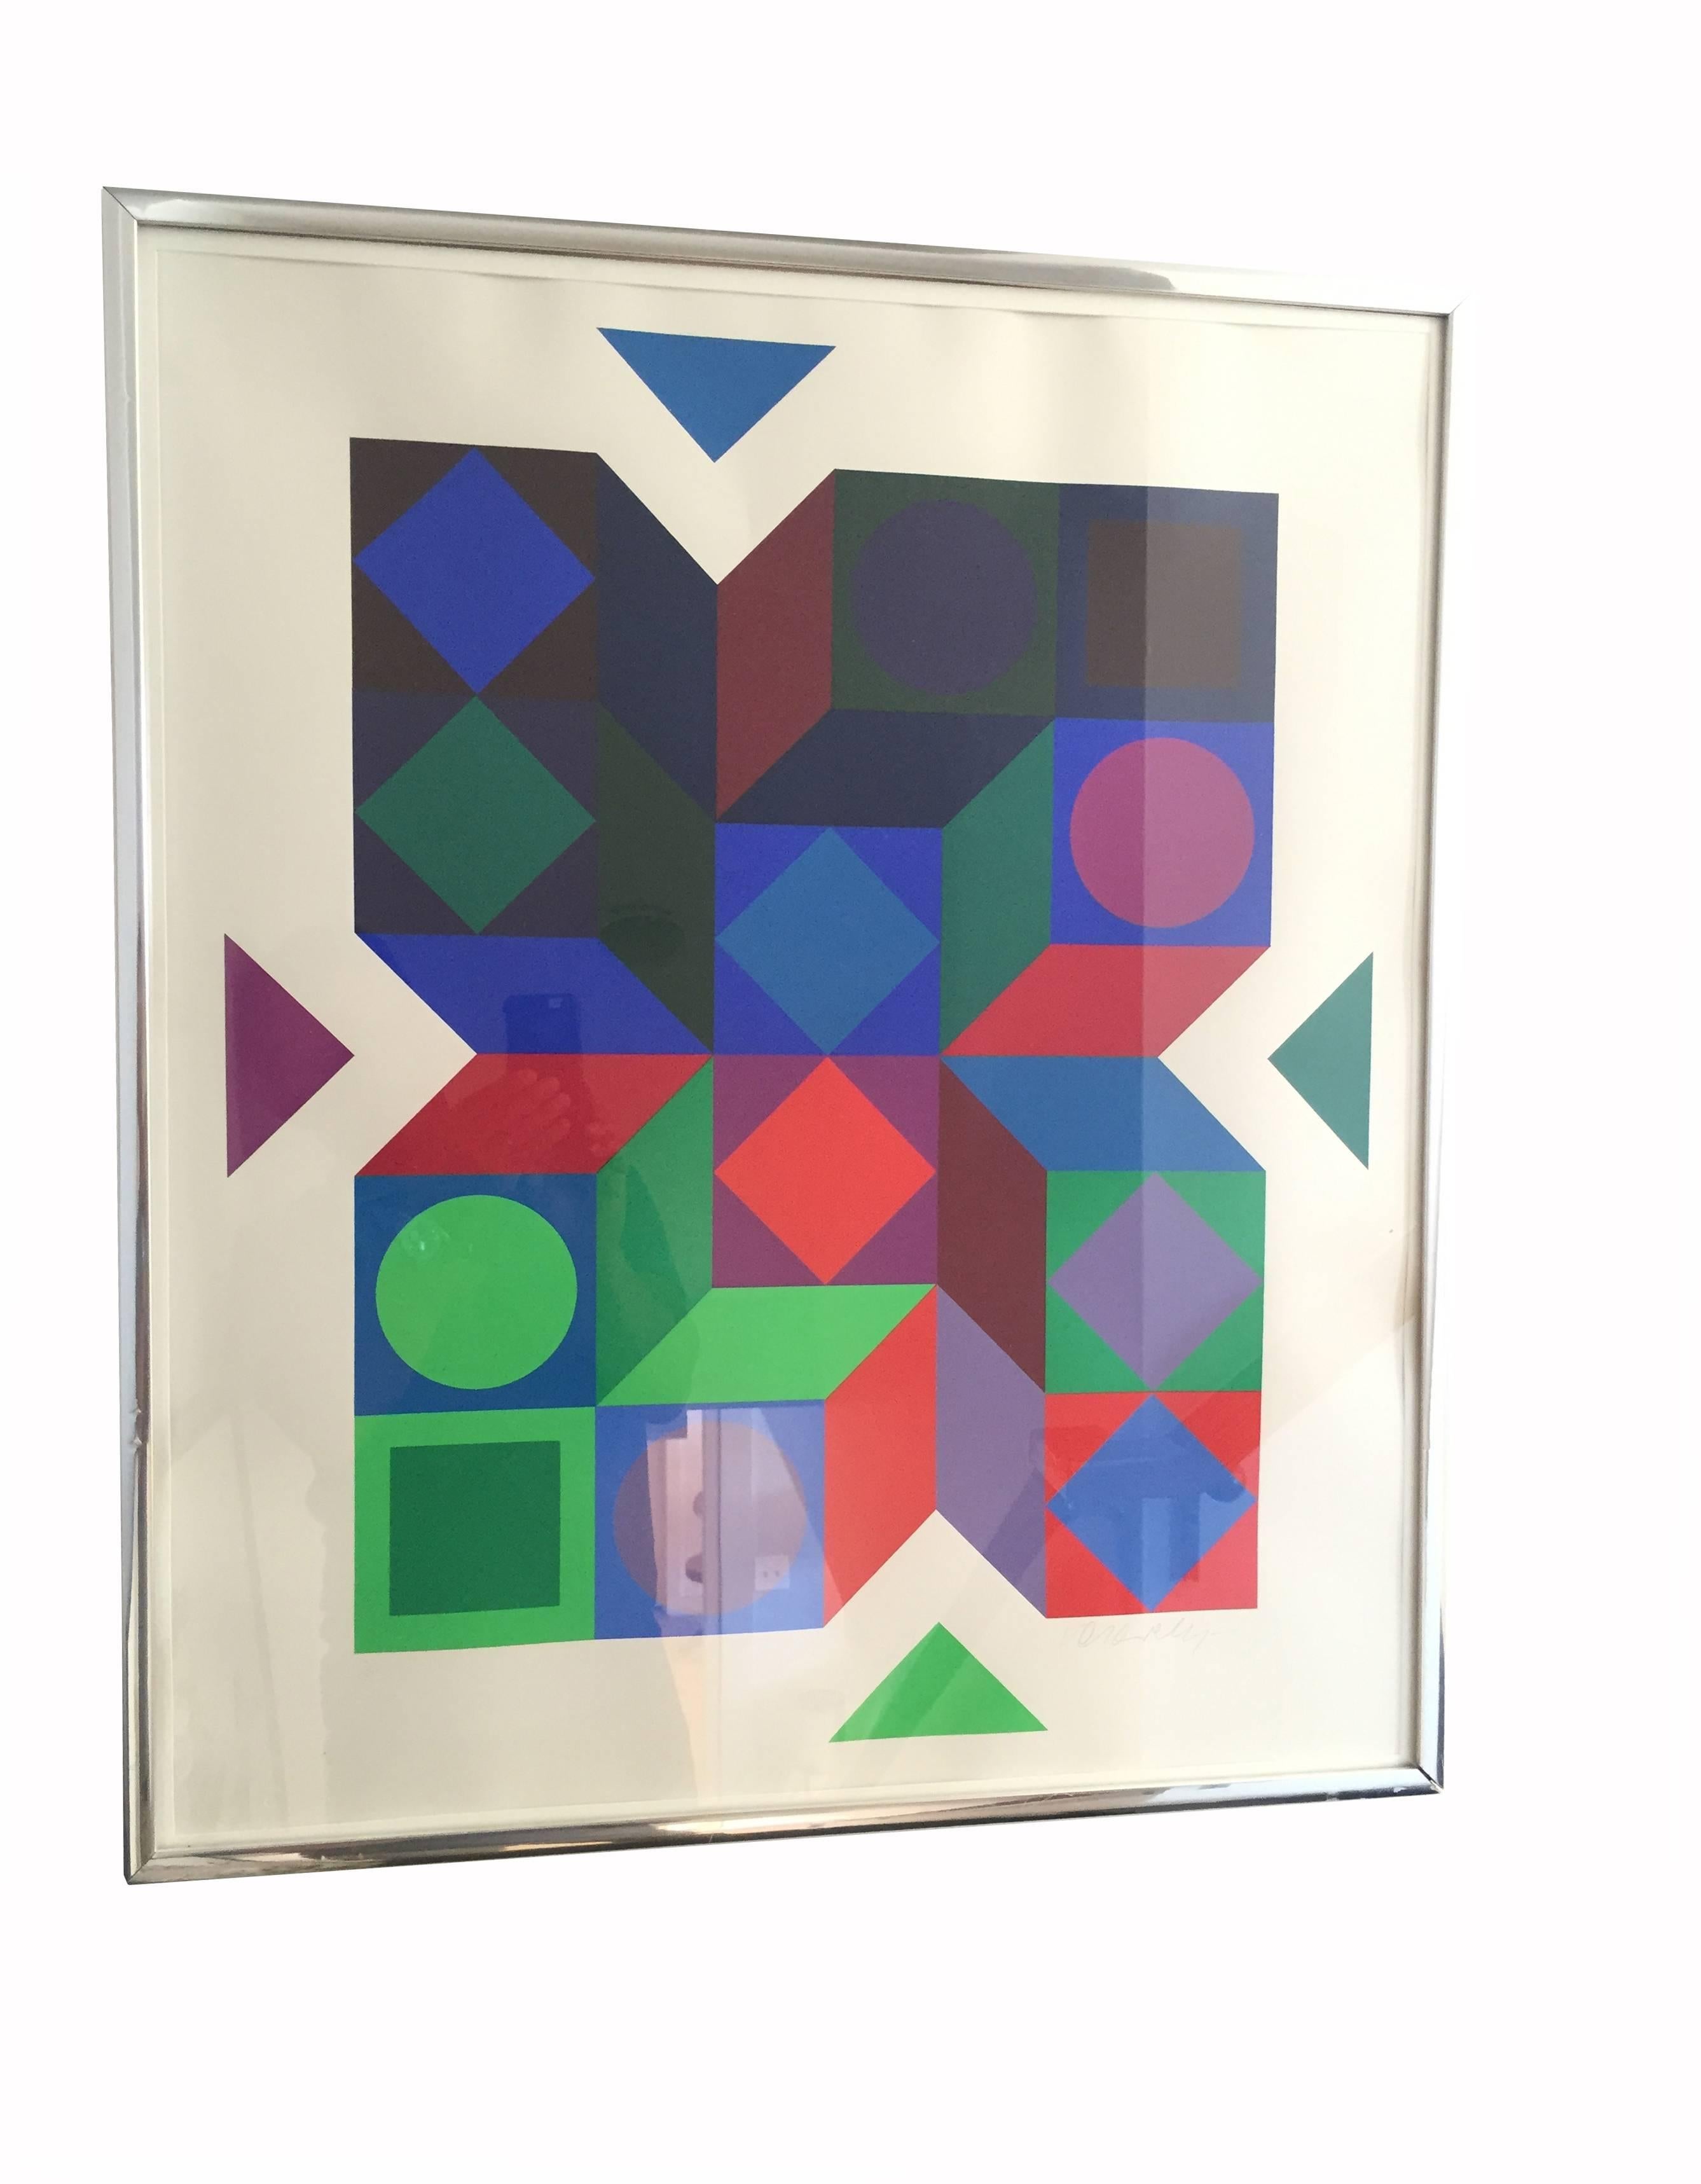 A silkscreen print signed by Vasarely in the lower right.  Edition of 300, numbered 9/300, dry stamp of publisher, Denise Renee Editeur, Paris, in lower left corner. Undated.